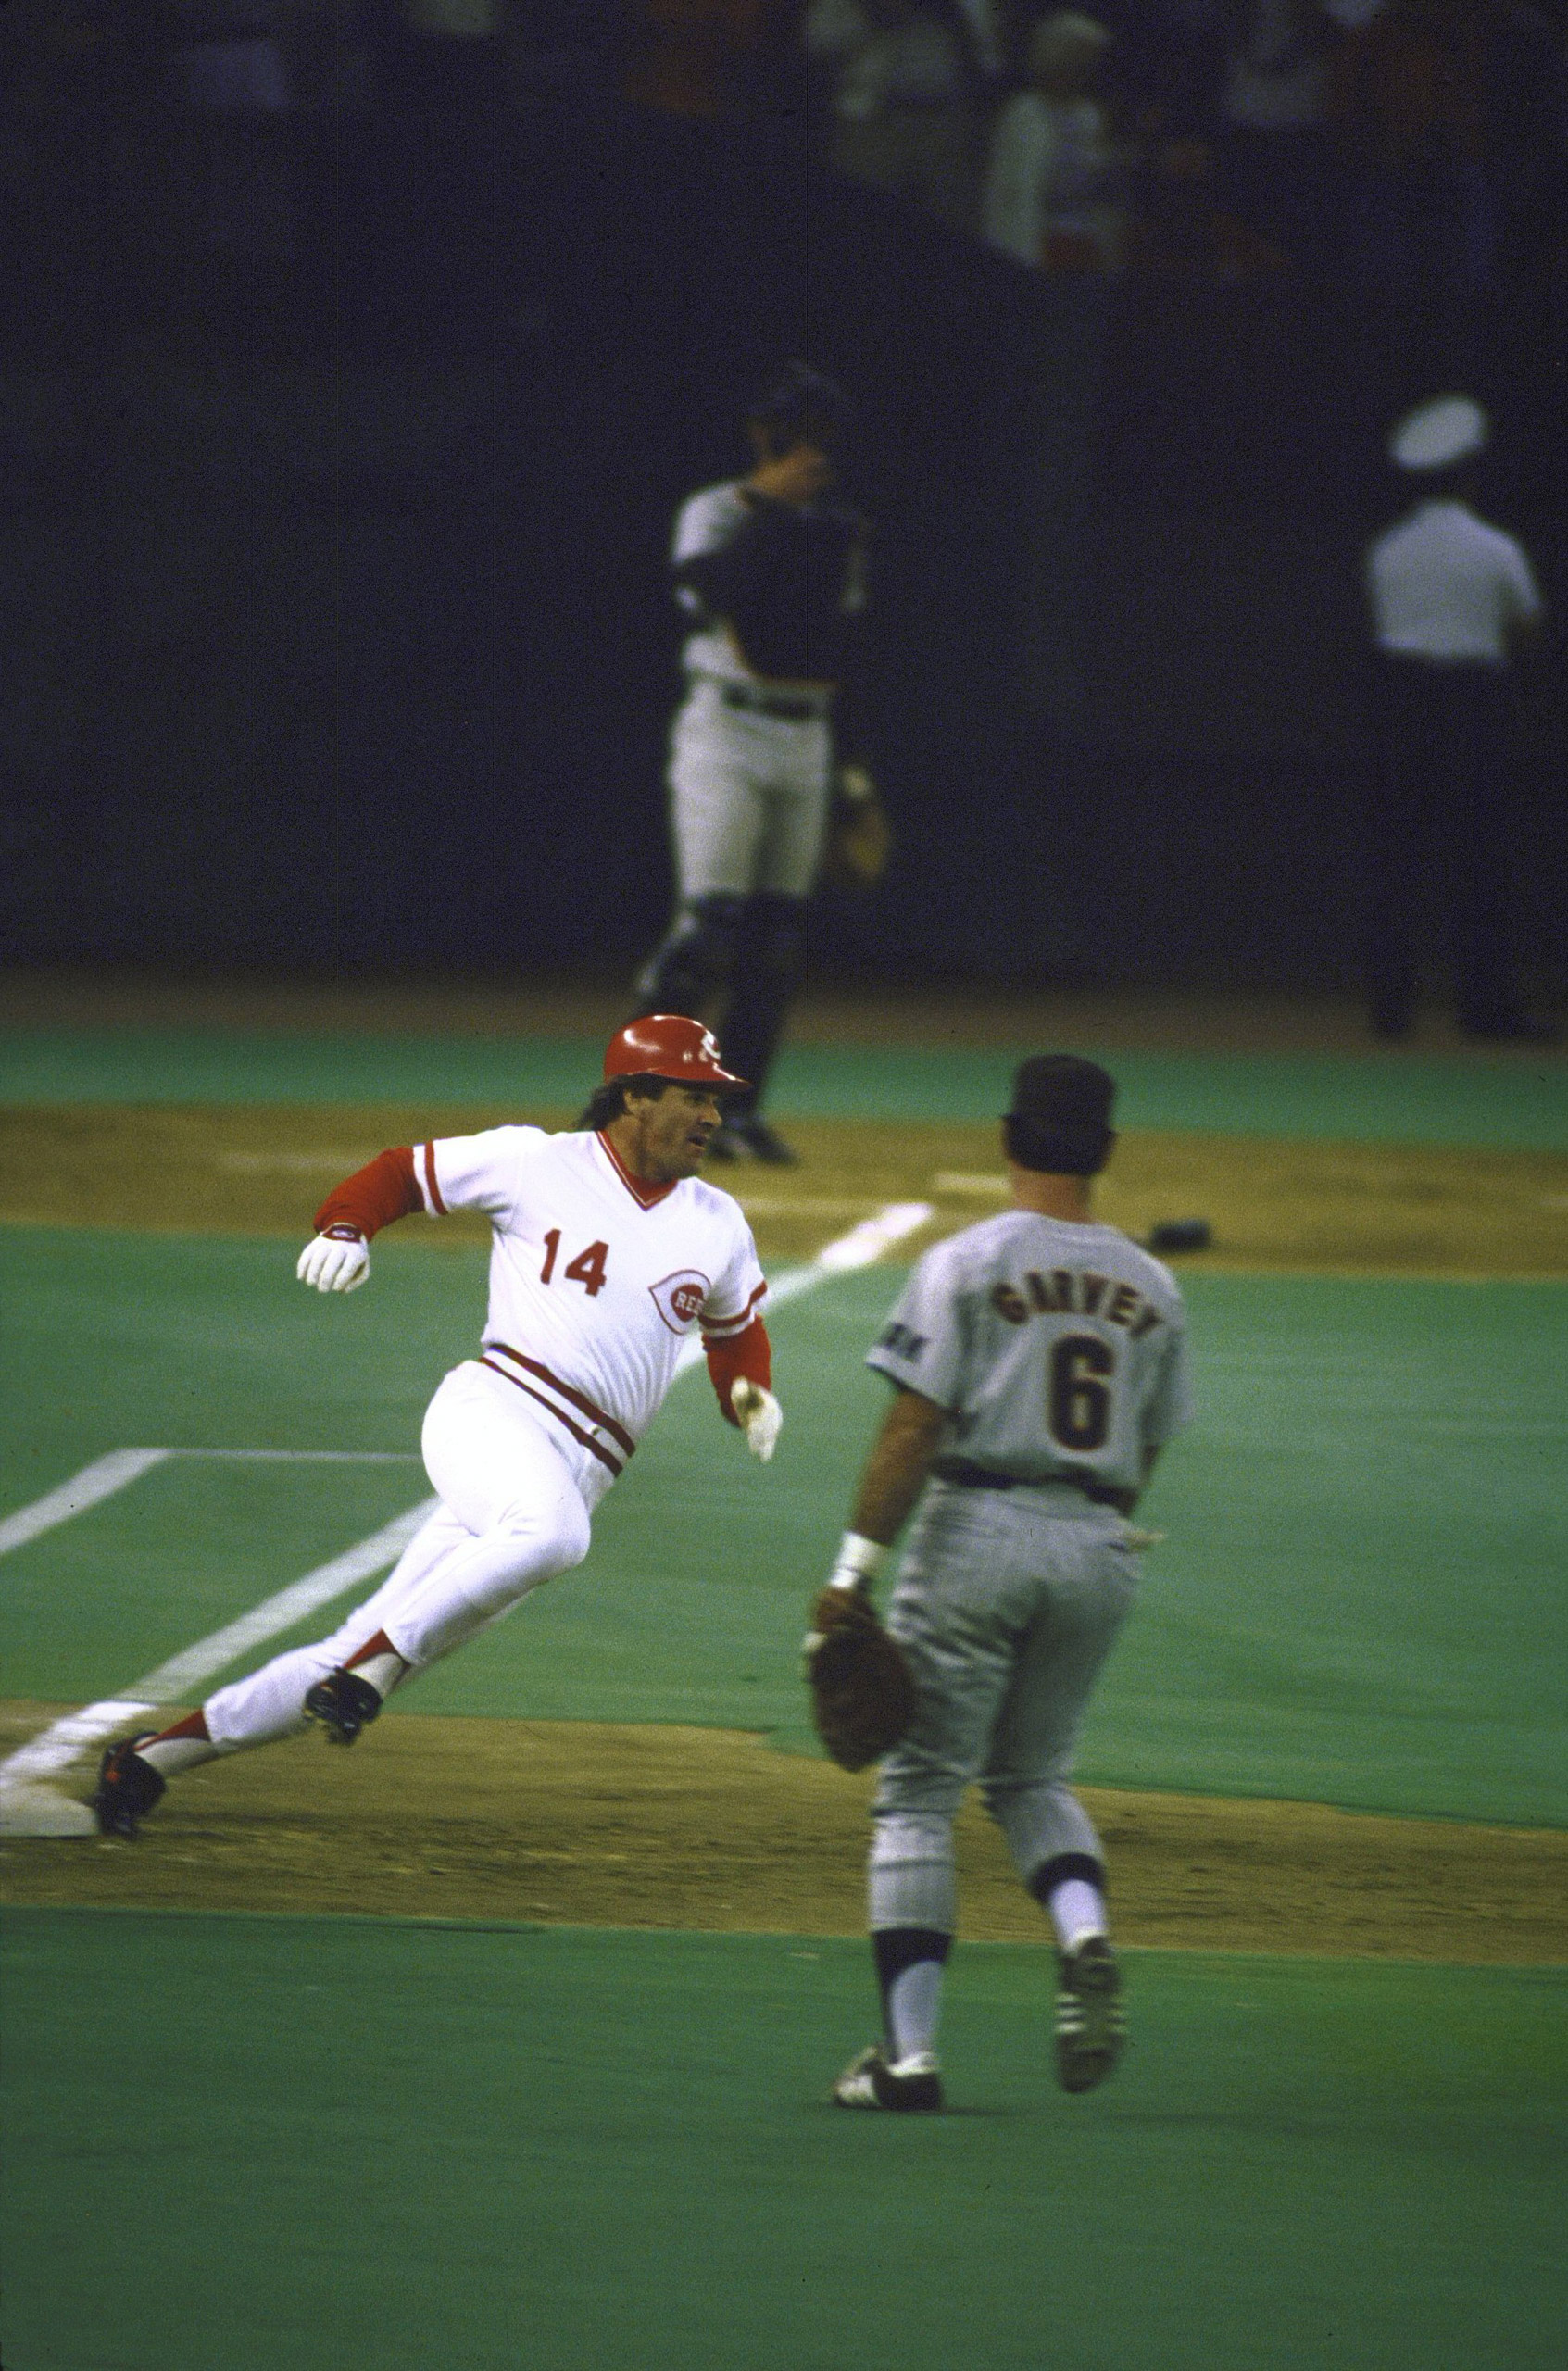 Cincinnati Reds Pete Rose (14) in action, rounding first base after setting hitting record with No. 4,192 career hit during game vs San Diego Padres.